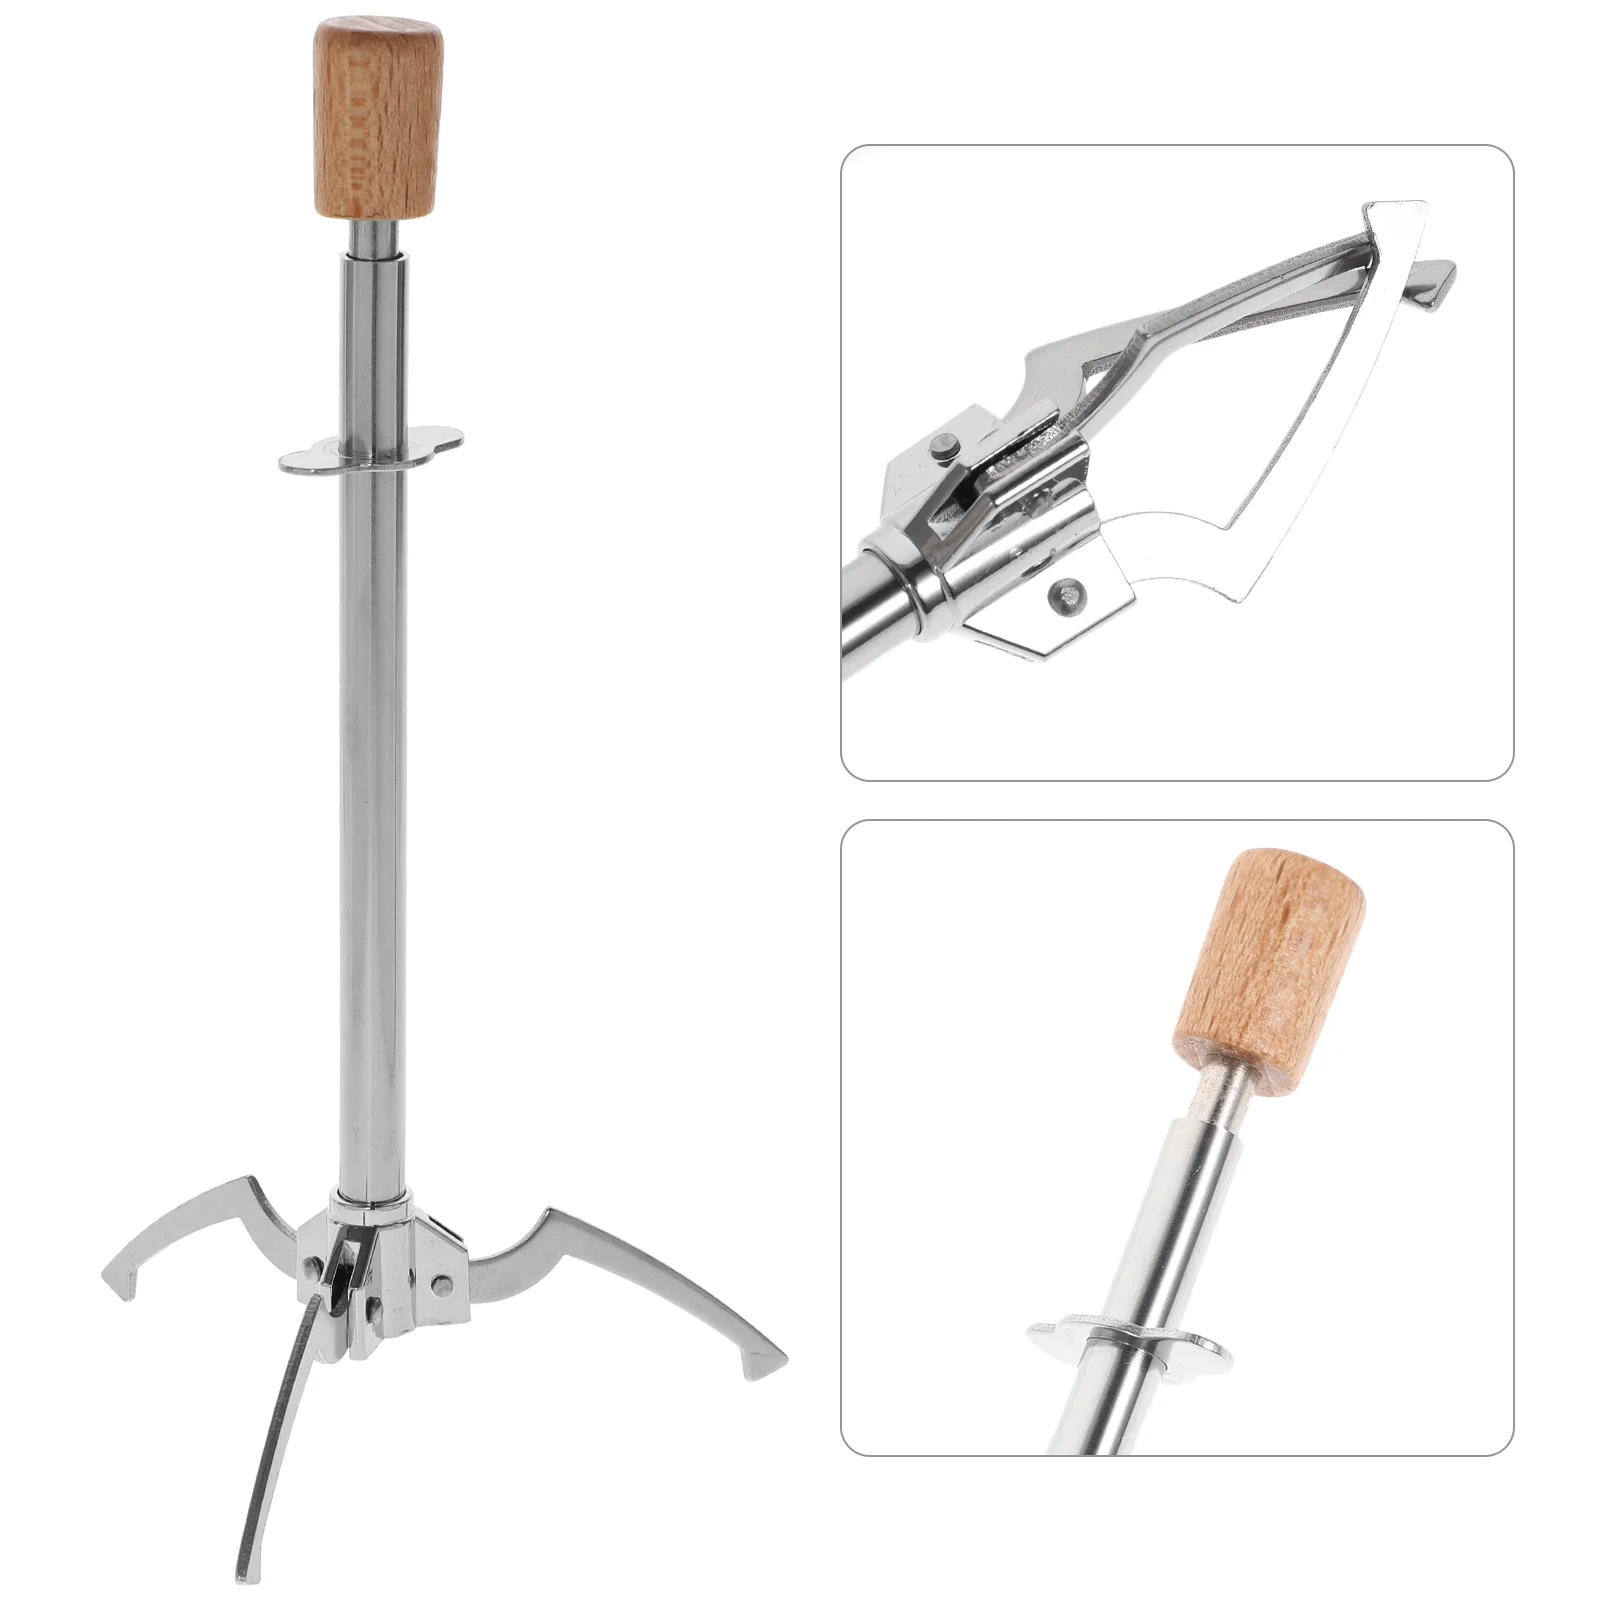 

Tongs Tong Steak Salad Cooking Grilling Clip Appetizer Buffet Server Serving Clamp Ice Grabber Toast Utility Chef Scissor